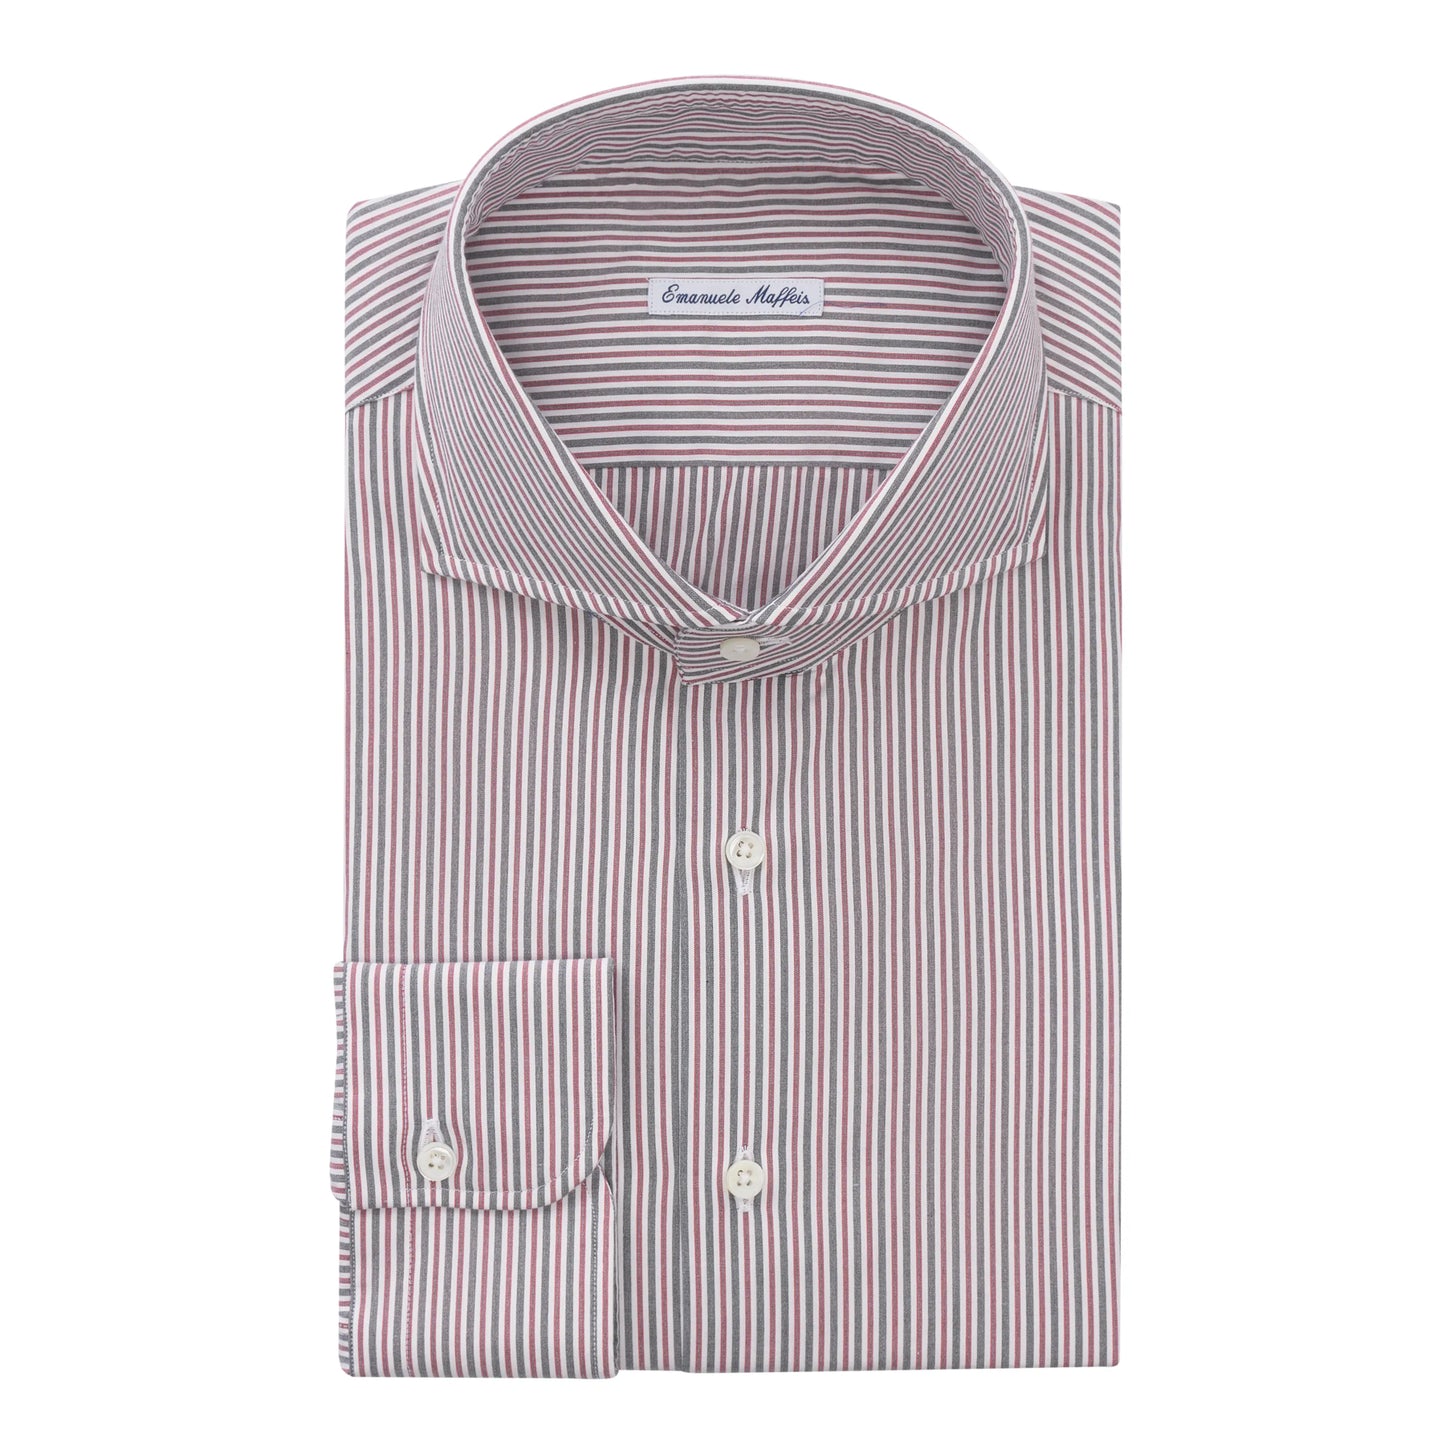 Multicolor Striped Cotton Shirt with Shark Collar